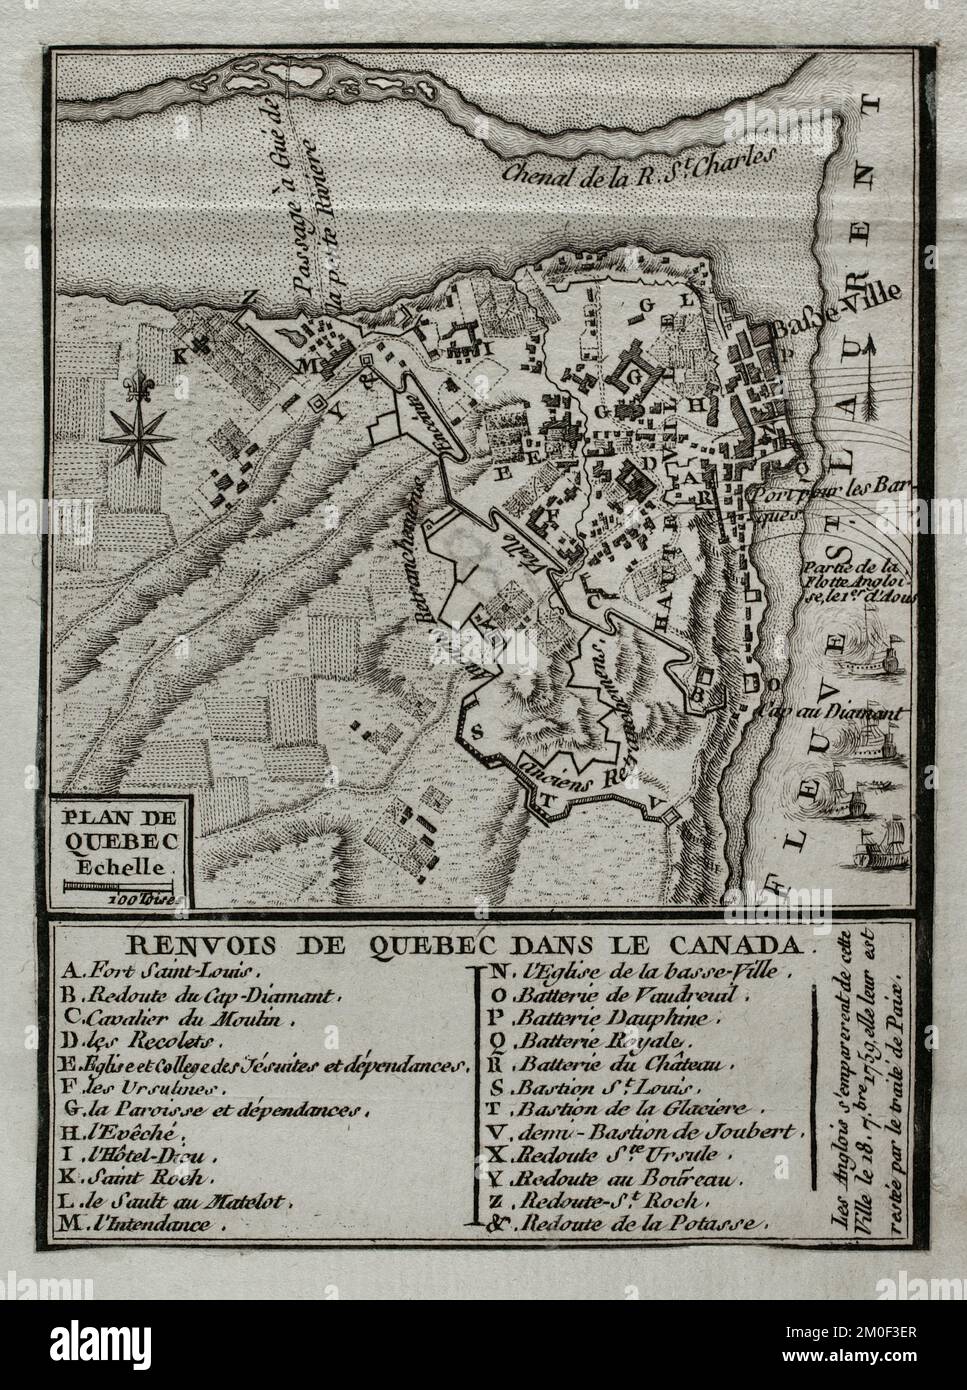 Seven Years War (1756-1763). Map of Quebec, 1759. Canada. French Colony of the Viceroyalty of New France. On September 18, 1759, the British captured the city. Published in 1765 by the cartographer Jean de Beaurain (1696-1771) as an illustration of his Great Map of Germany, with the events that took place during the Seven Years War. Engraving. French edition, 1765. Military Historical Library of Barcelona (Biblioteca Histórico Militar de Barcelona). Catalonia. Spain. Stock Photo